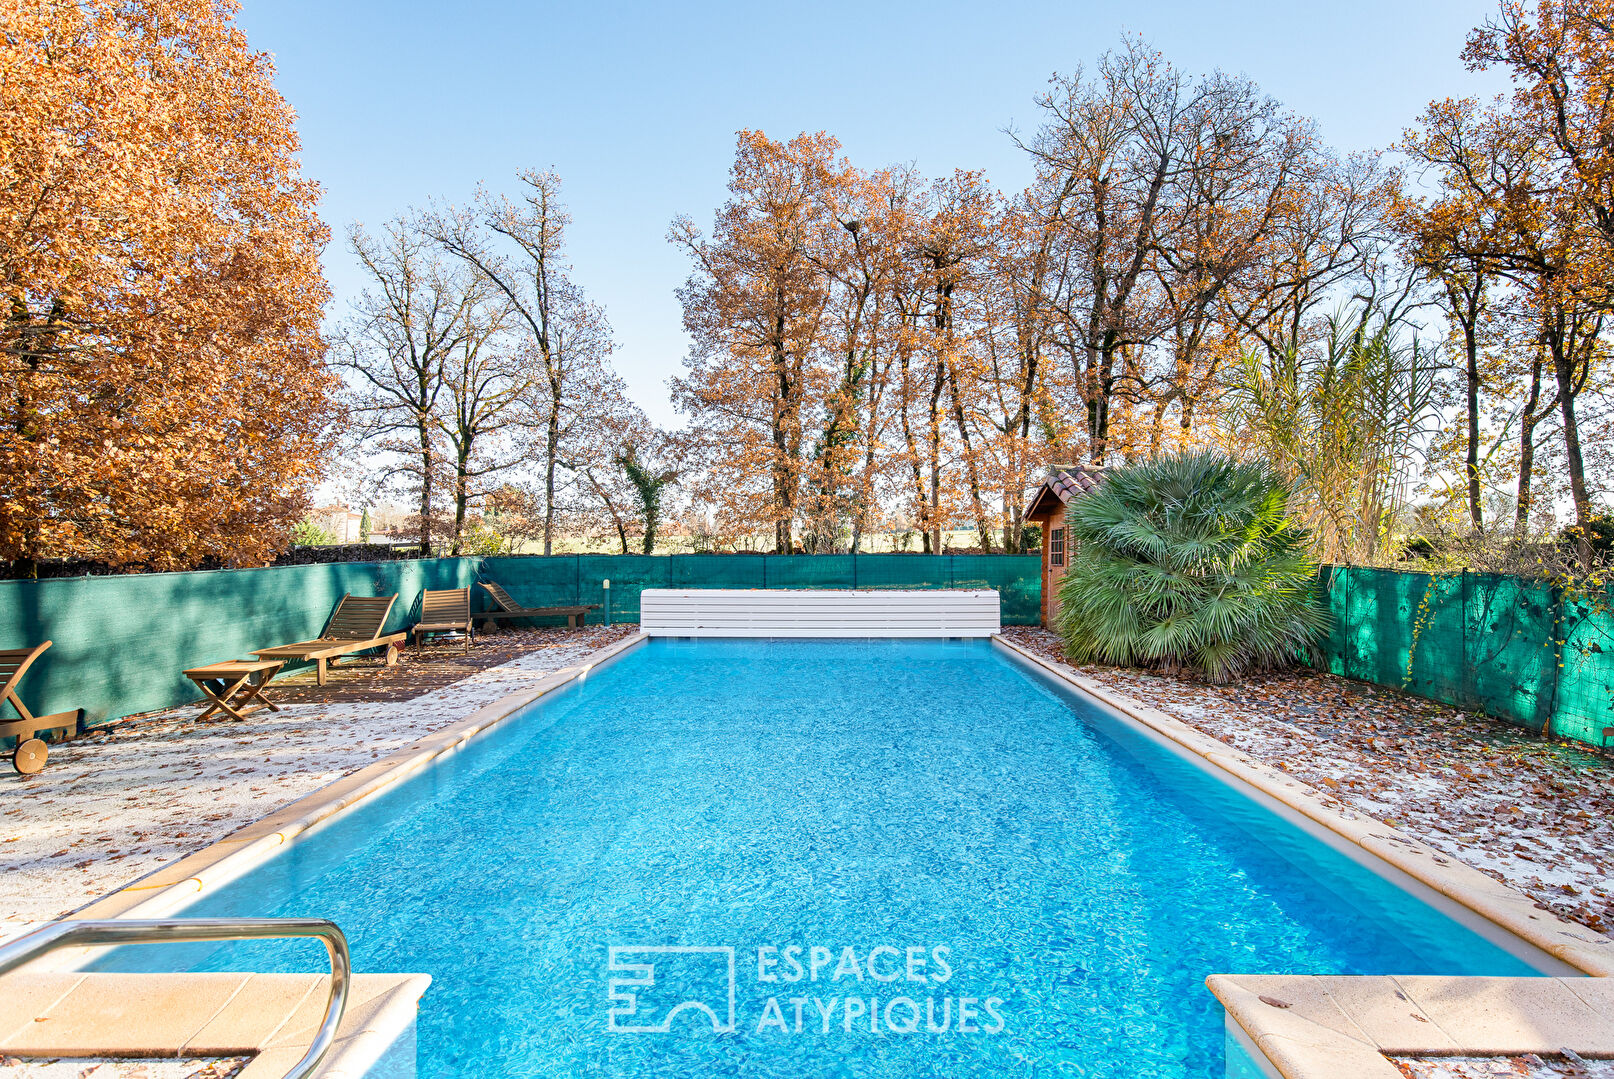 Set of two residential houses in the heart of a wooded park with swimming pool